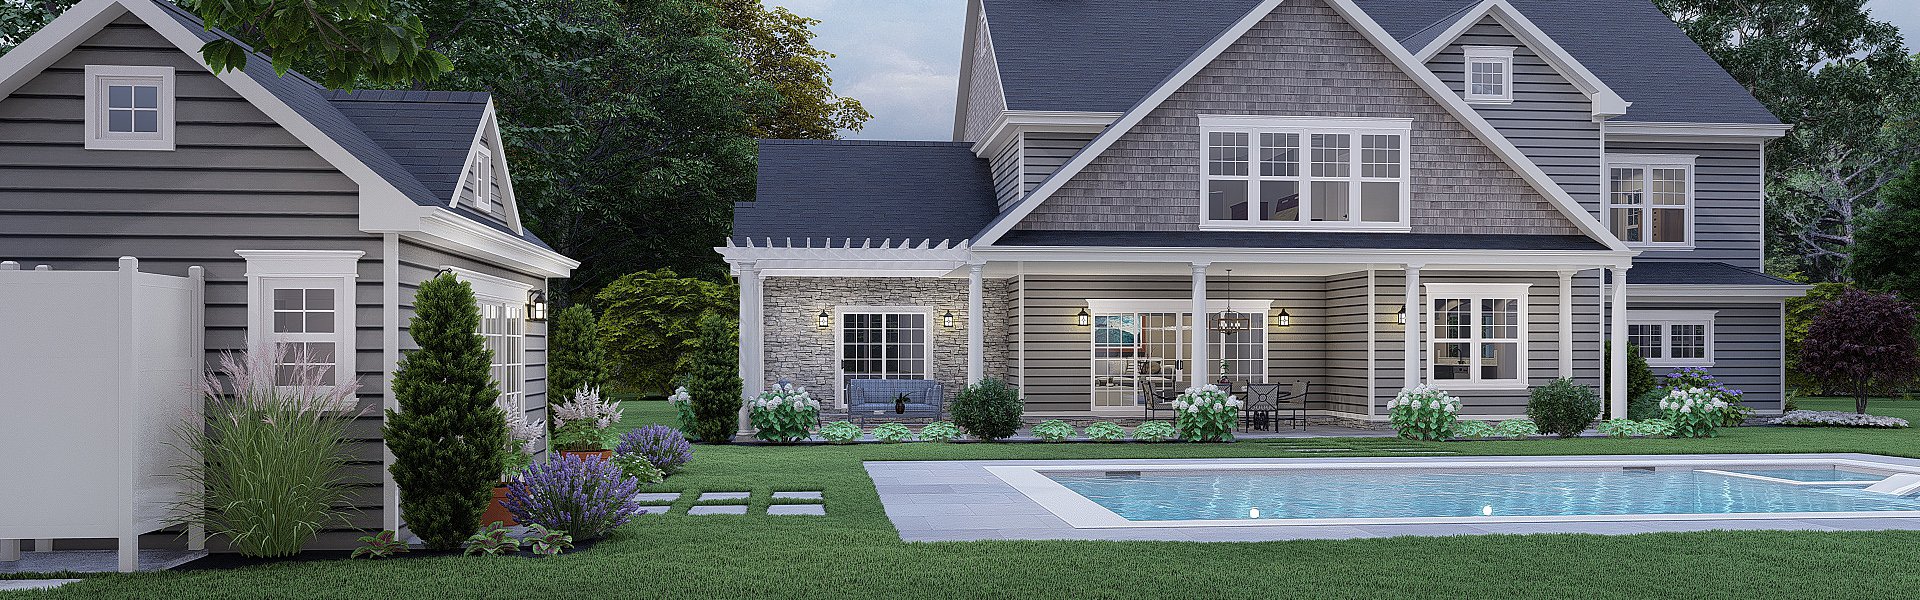 A 3D architectural rendering of the rear of a home with a pool and pool house in the foreground.